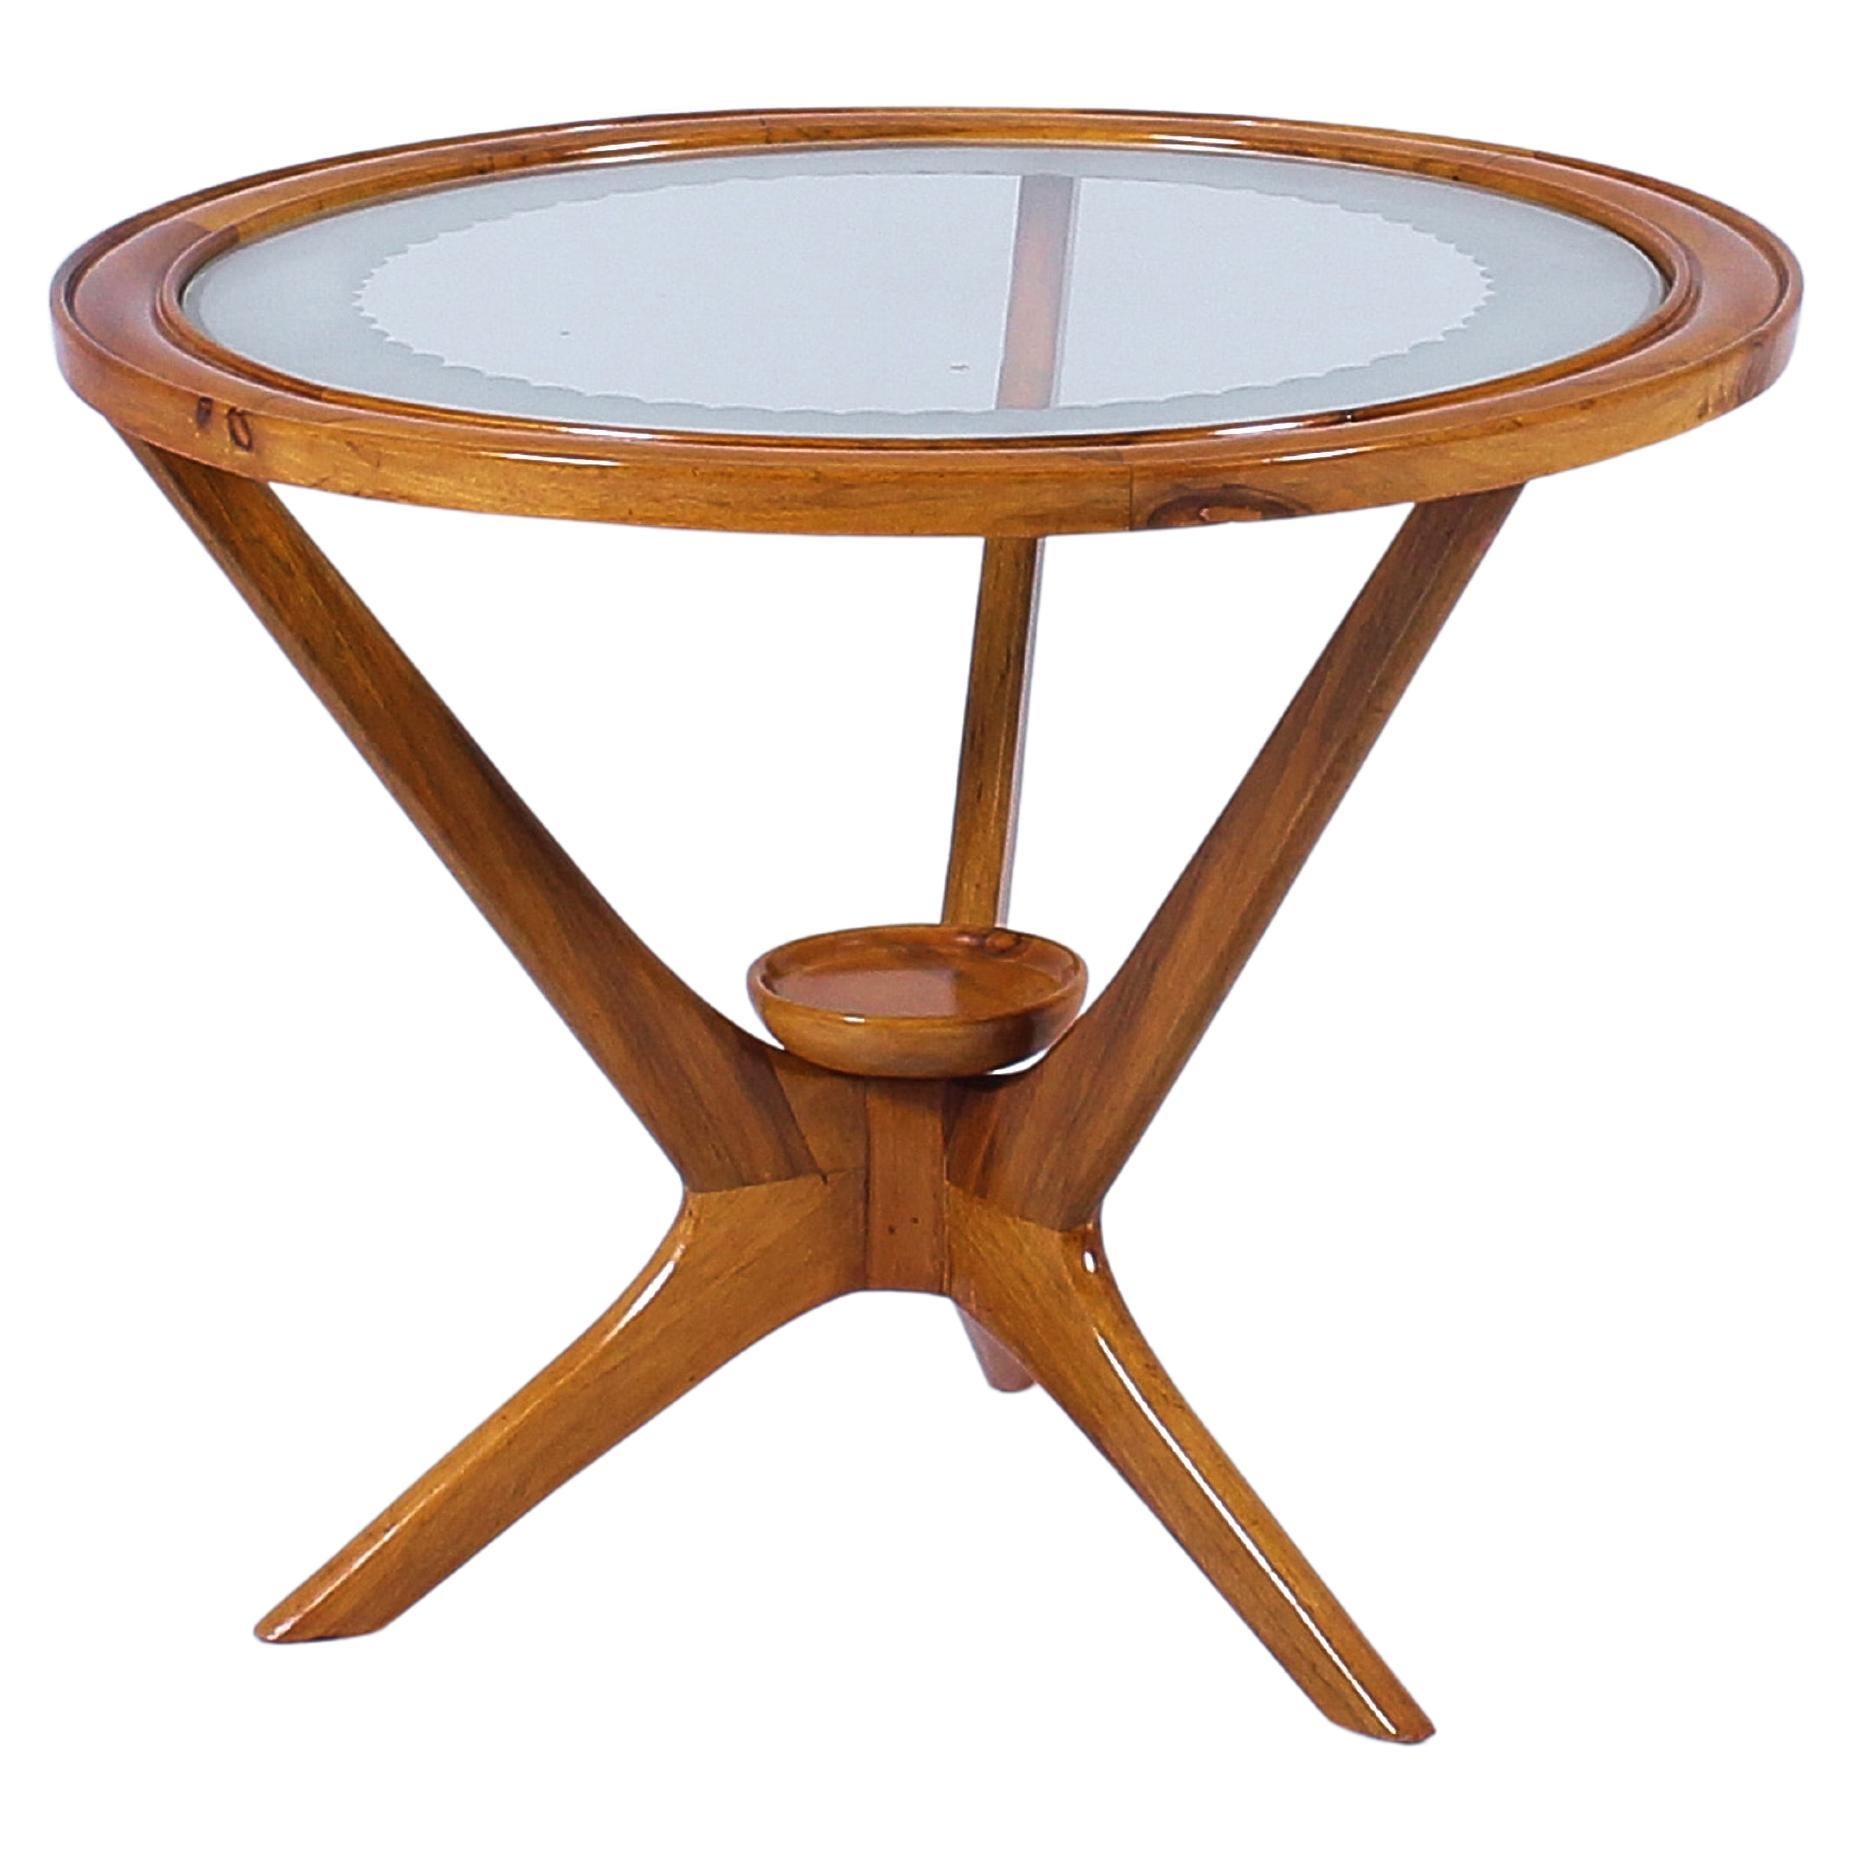 Midcentury Ico Parisi Style Wood and Glass Coffee Table 60s Italy For Sale